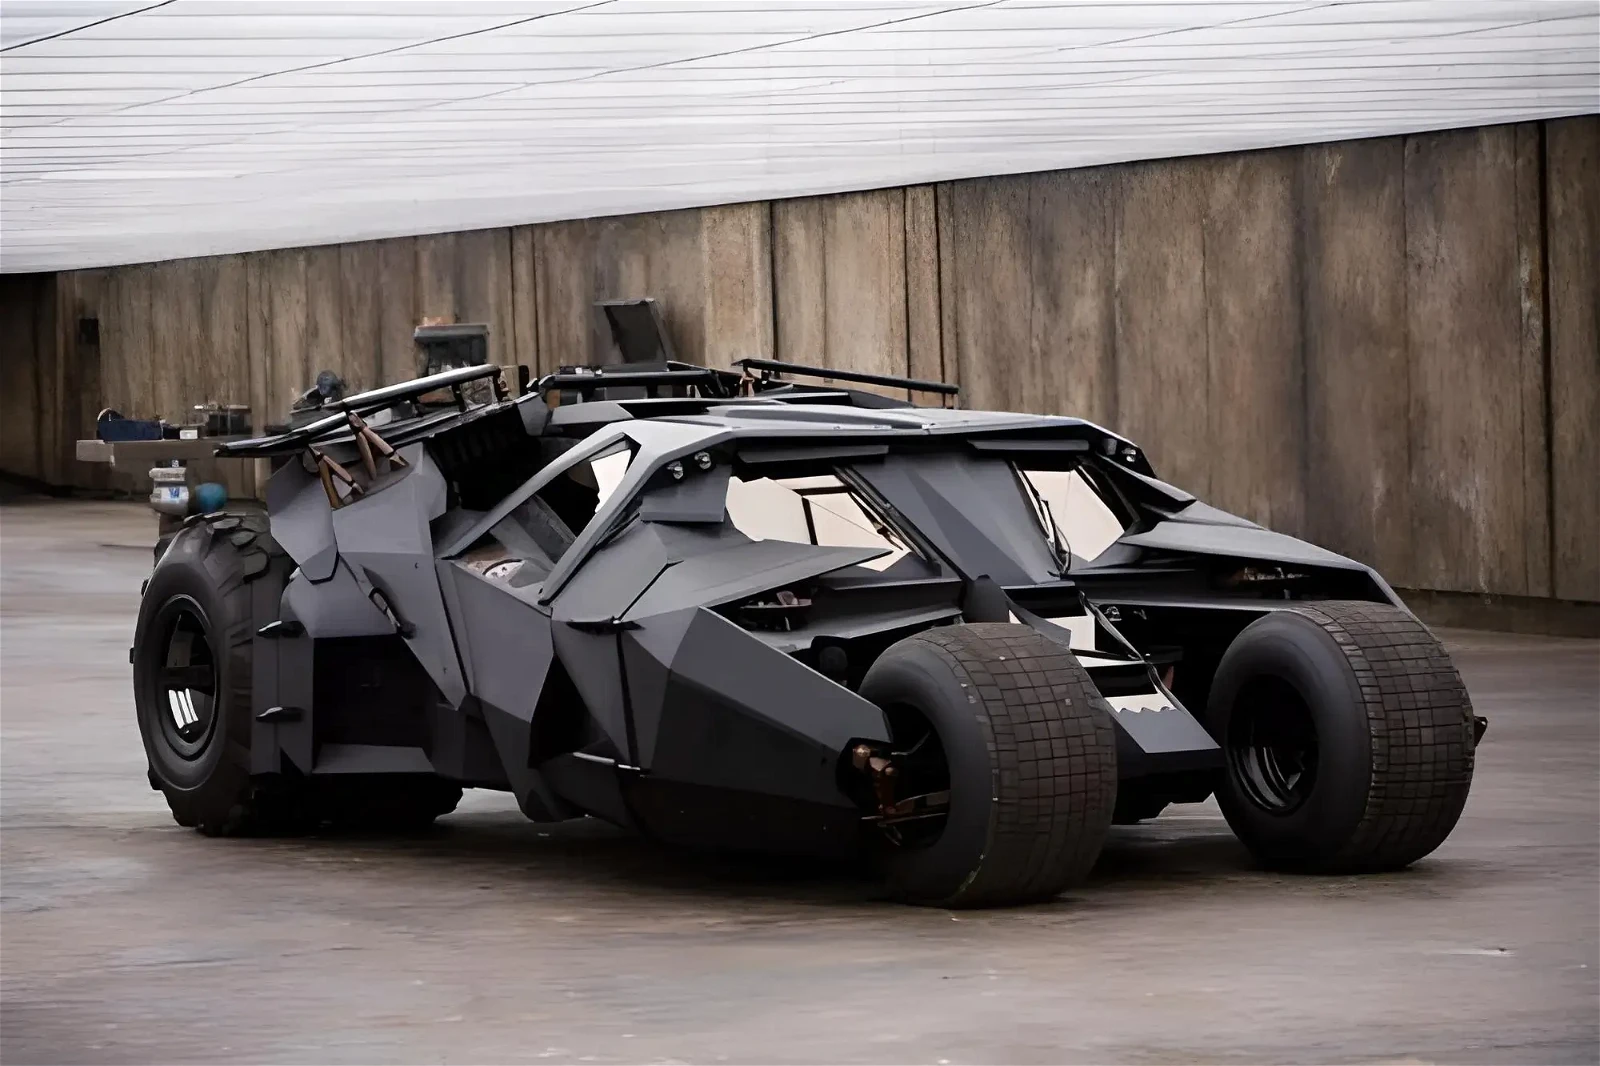 “He thought aliens were landing”: Christian Bale’s Batmobile Got One Drunk Driver Scared Sh*tless – What He Did Next Will Shock You